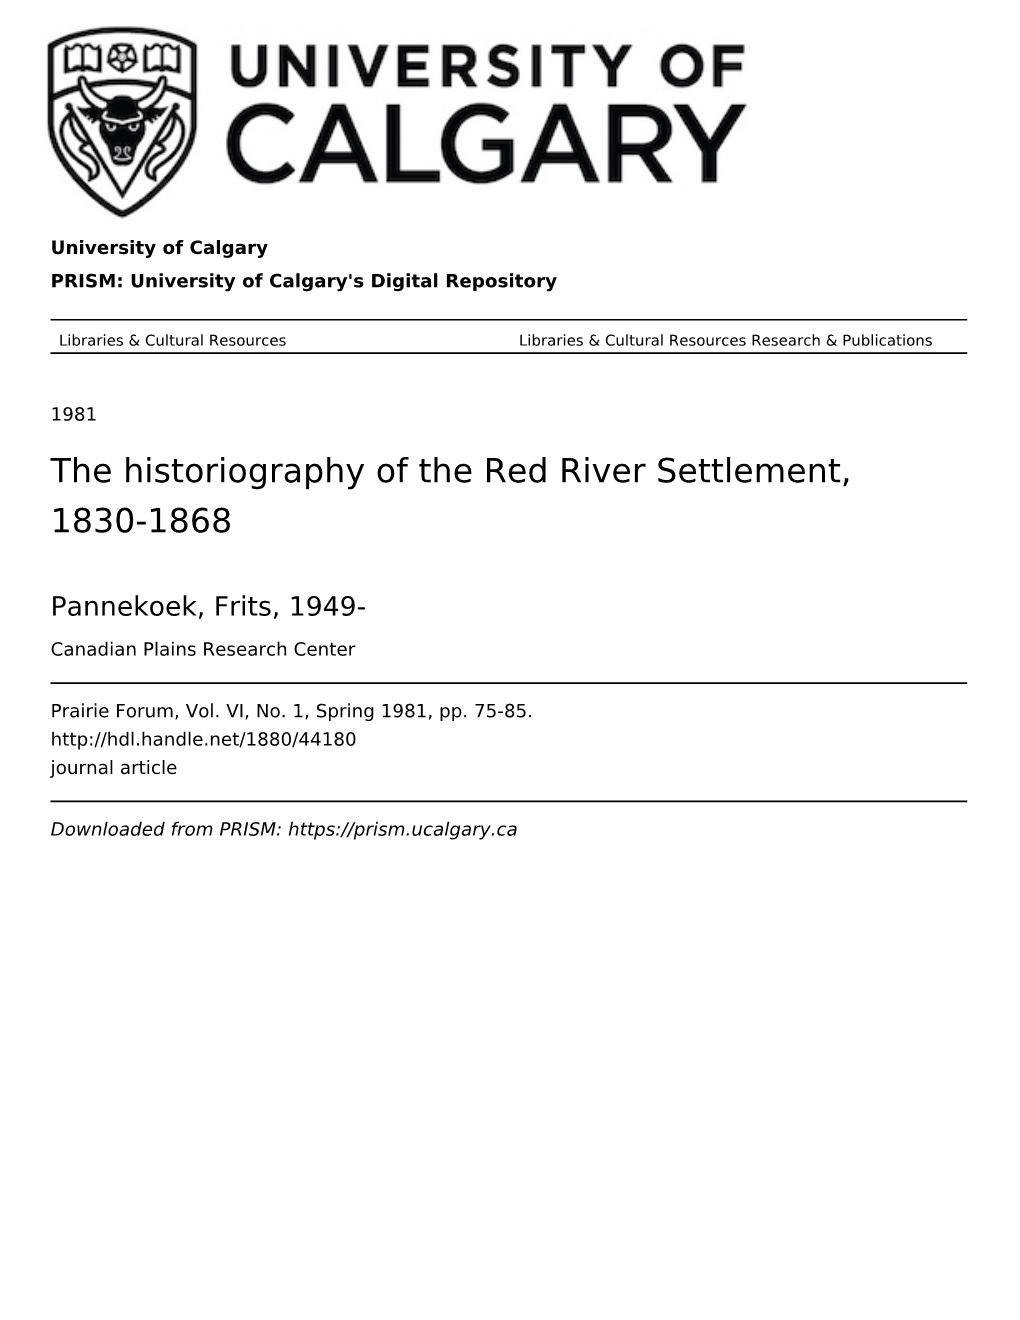 The Historiography of the Red River Settlement, 1830-1868